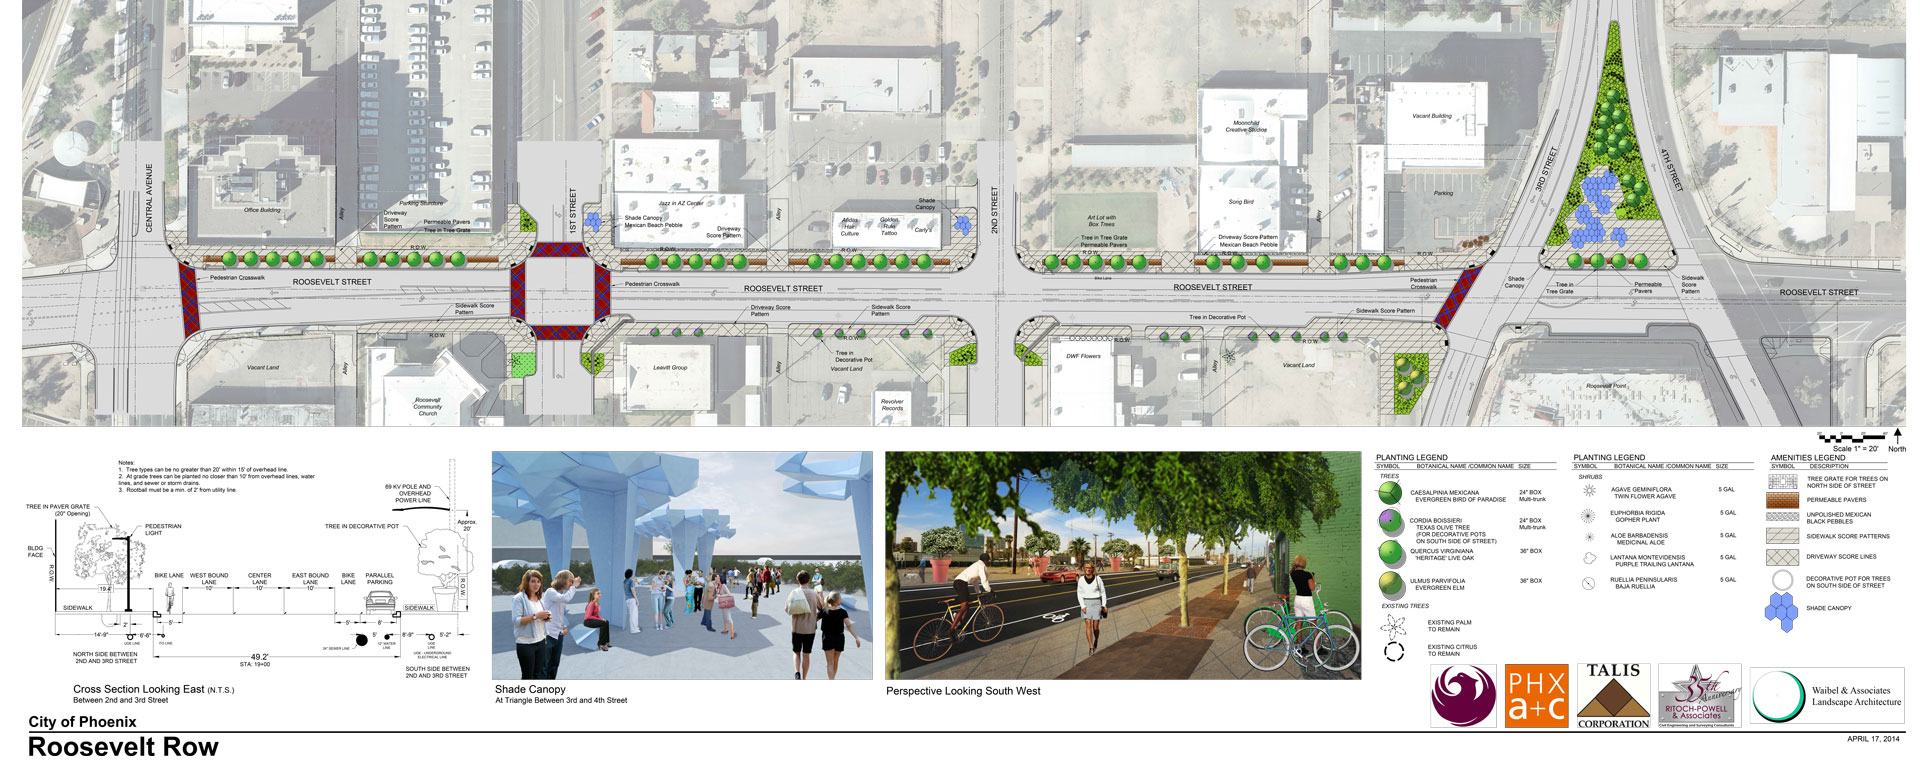 Image containing a plan view, section view, and perspectives views of the Roosevelt Row district. Geometric, angular metal structures provide shade in a pedestrian plaza. Trees provide shade along brick-paved sidewalks and bike lanes.